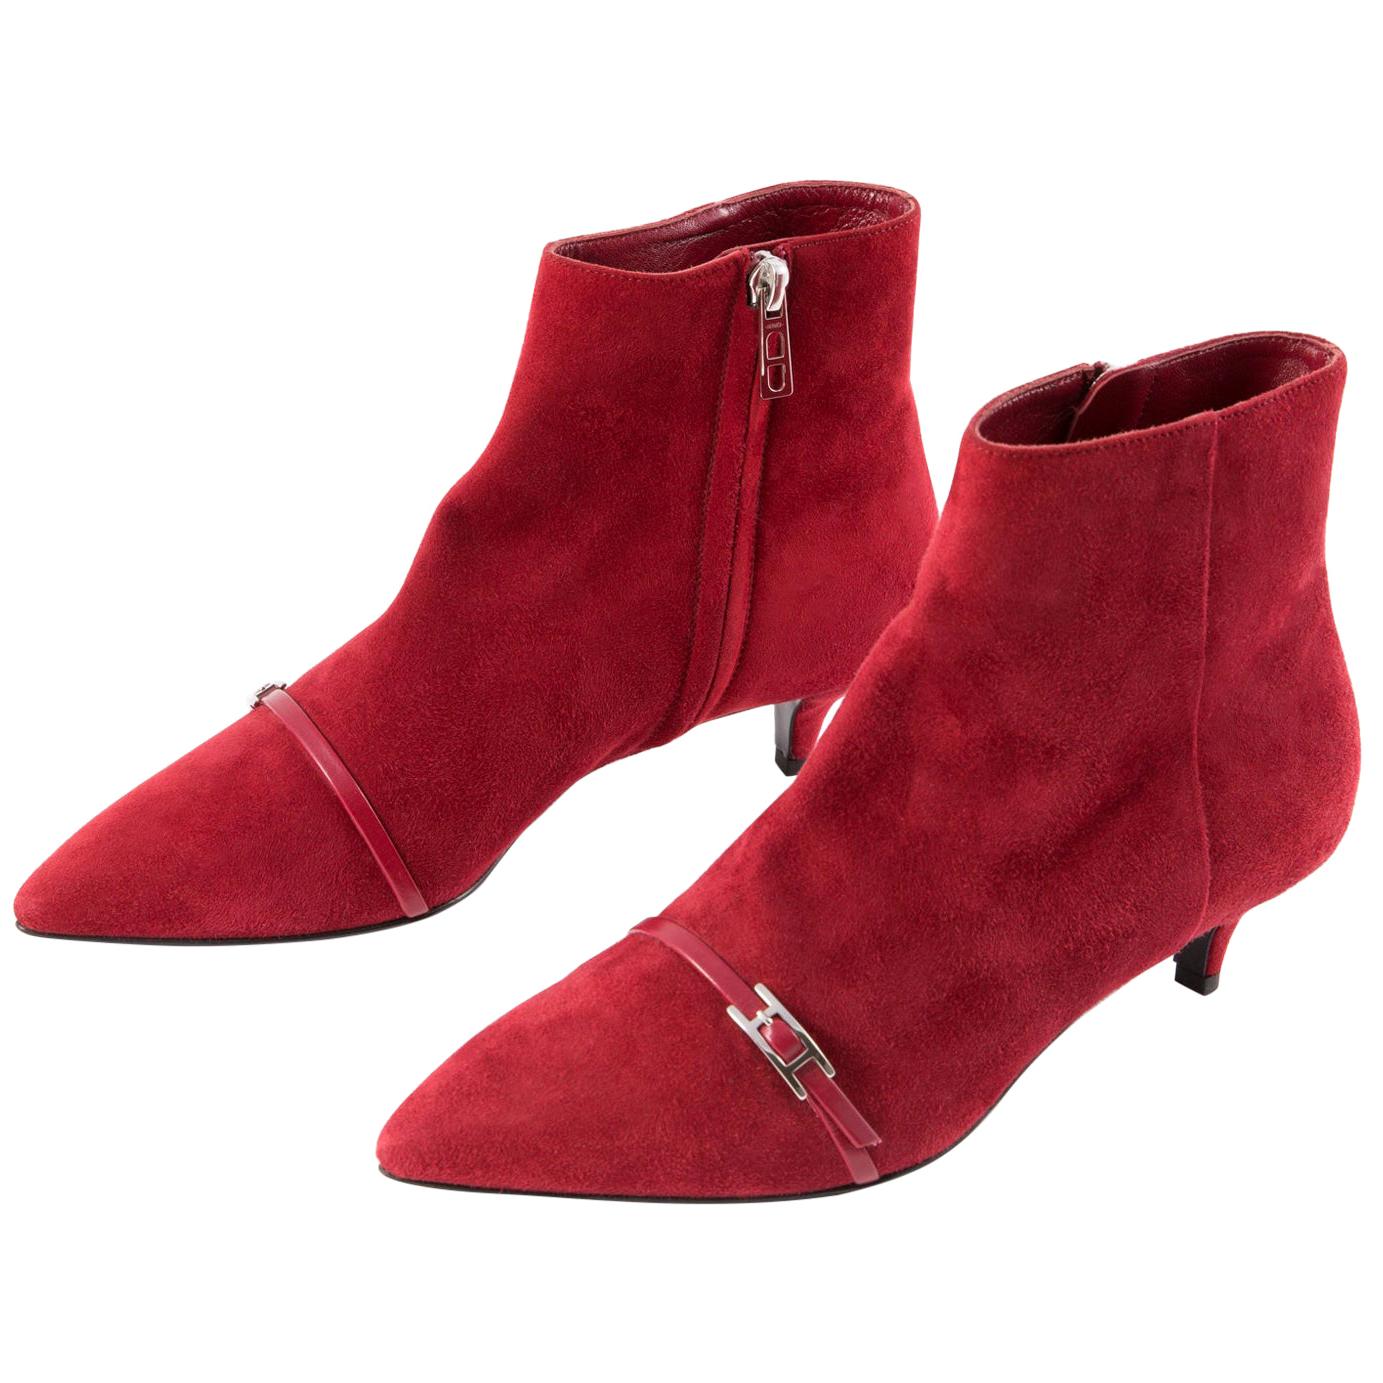 Red Hermes Deep Red Suede Leather Boots Shoes